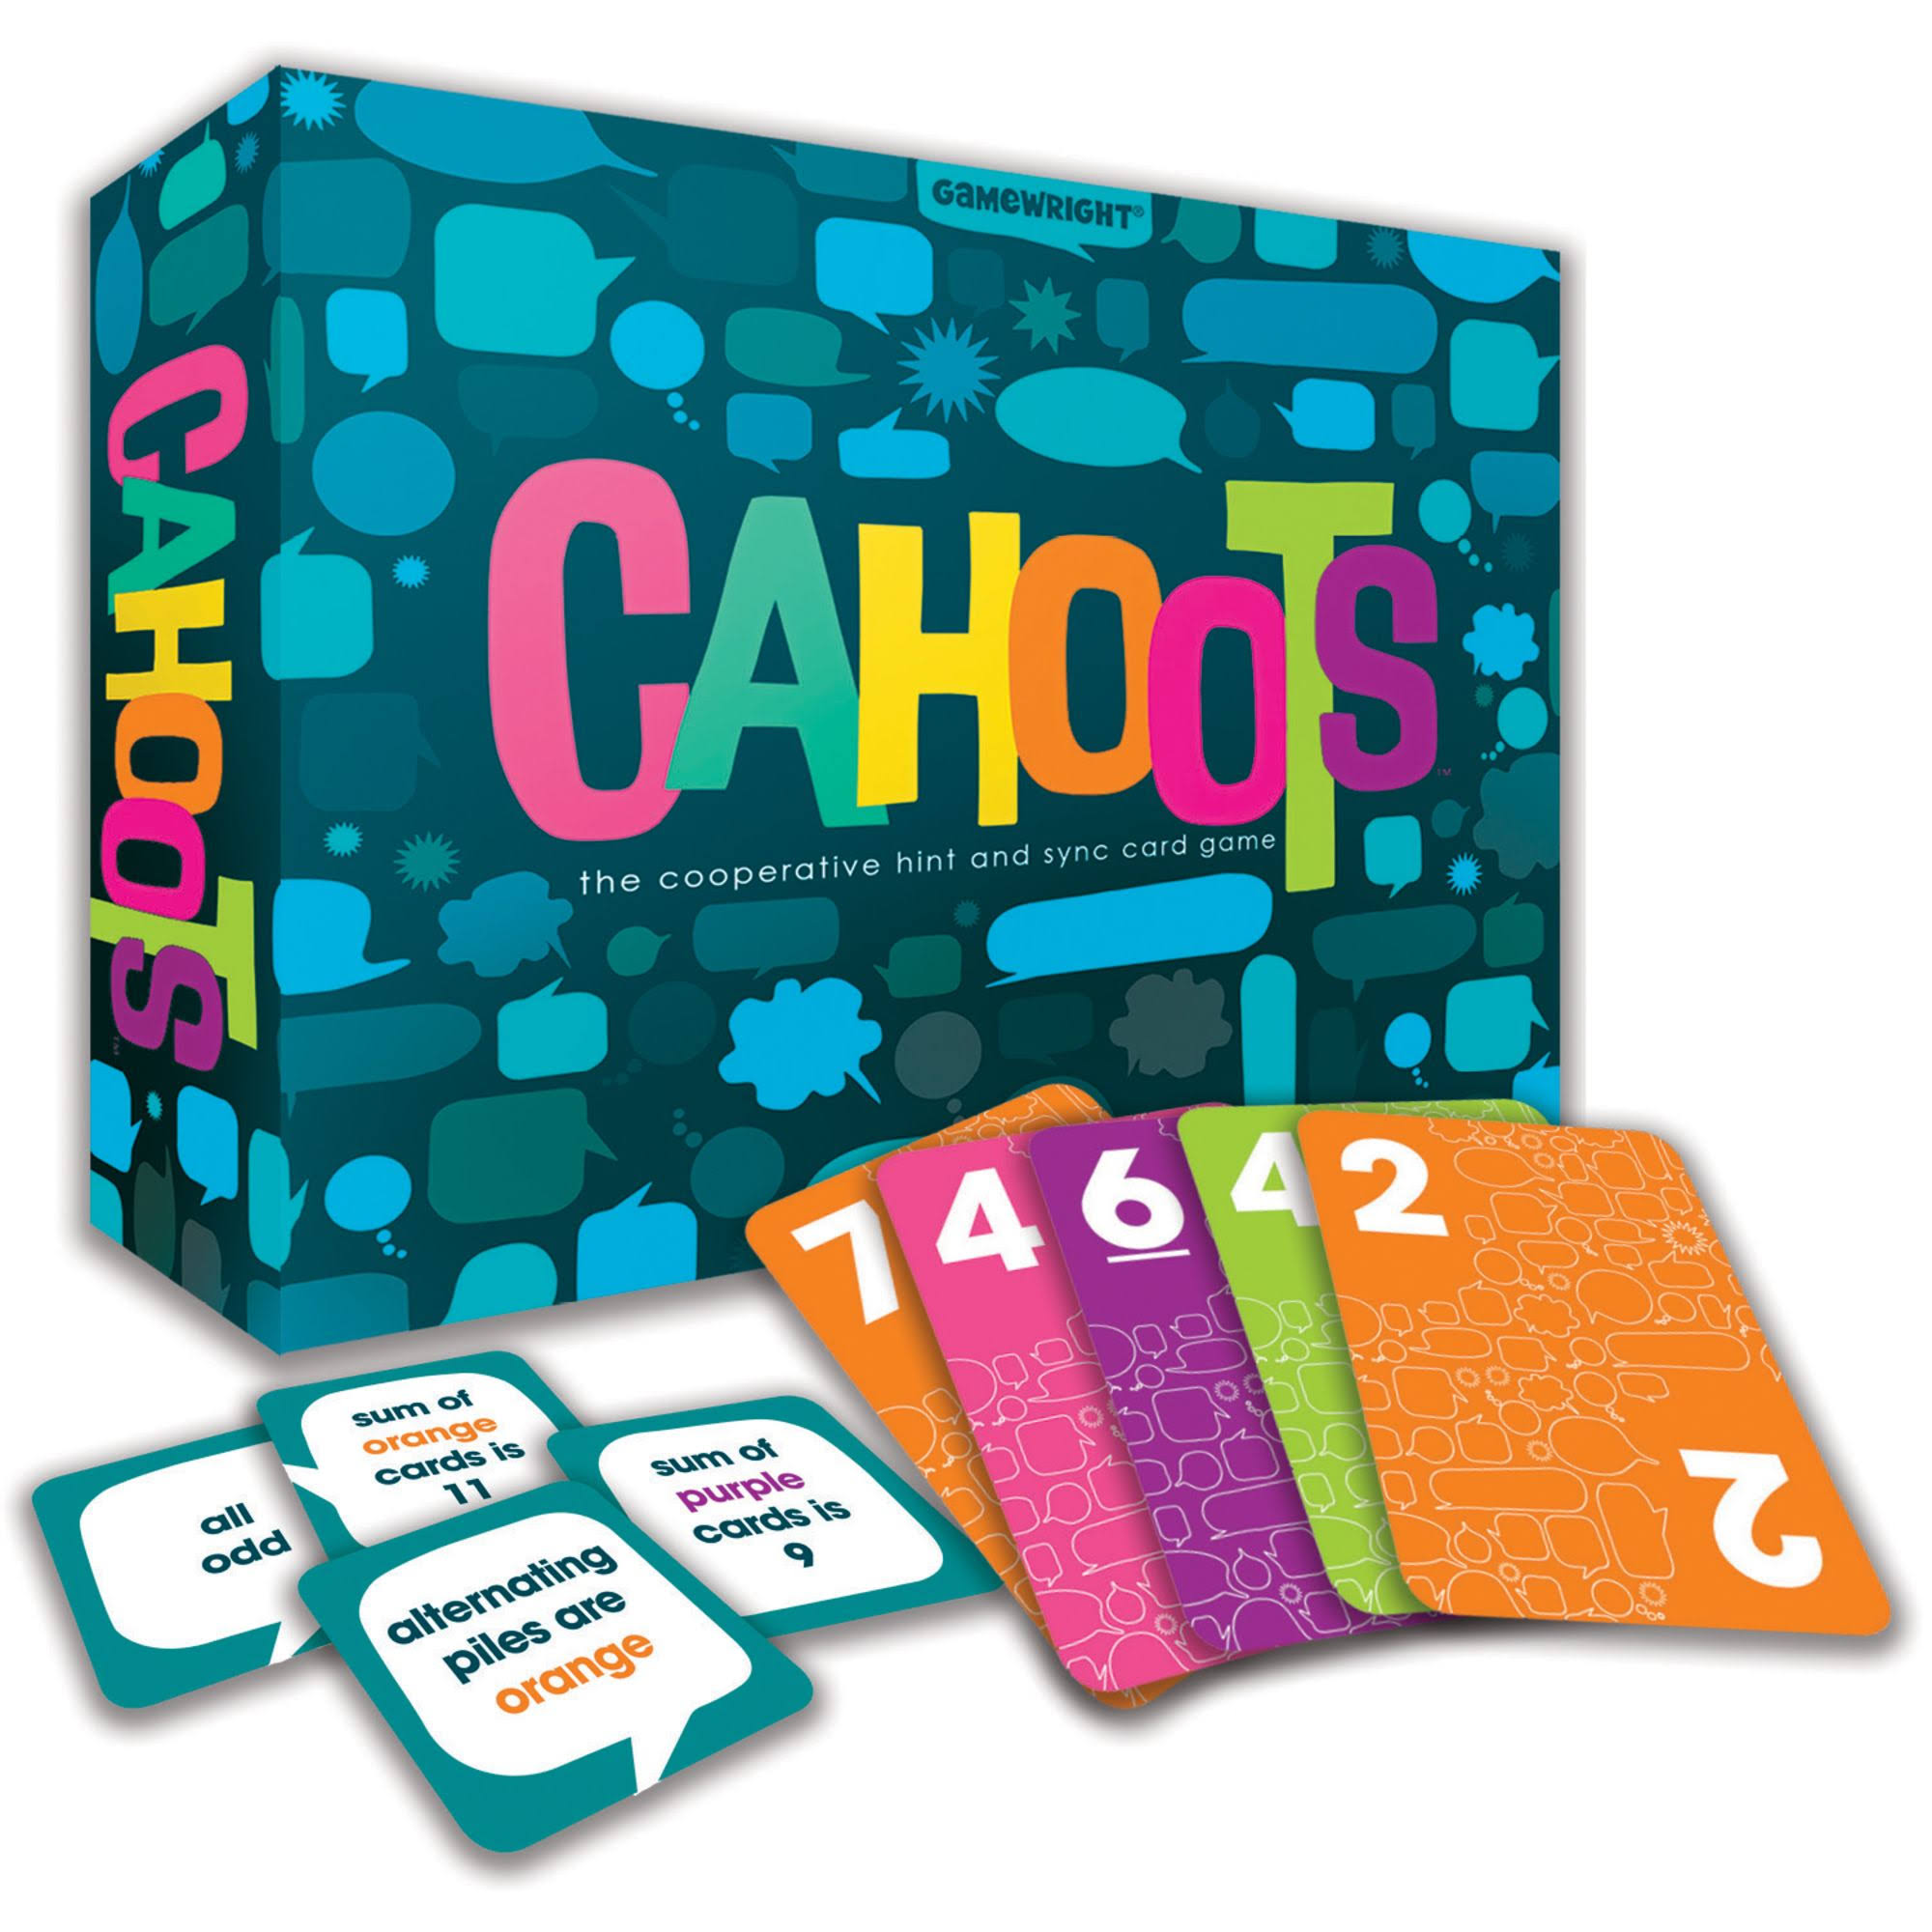 Gamewright Cahoots Game